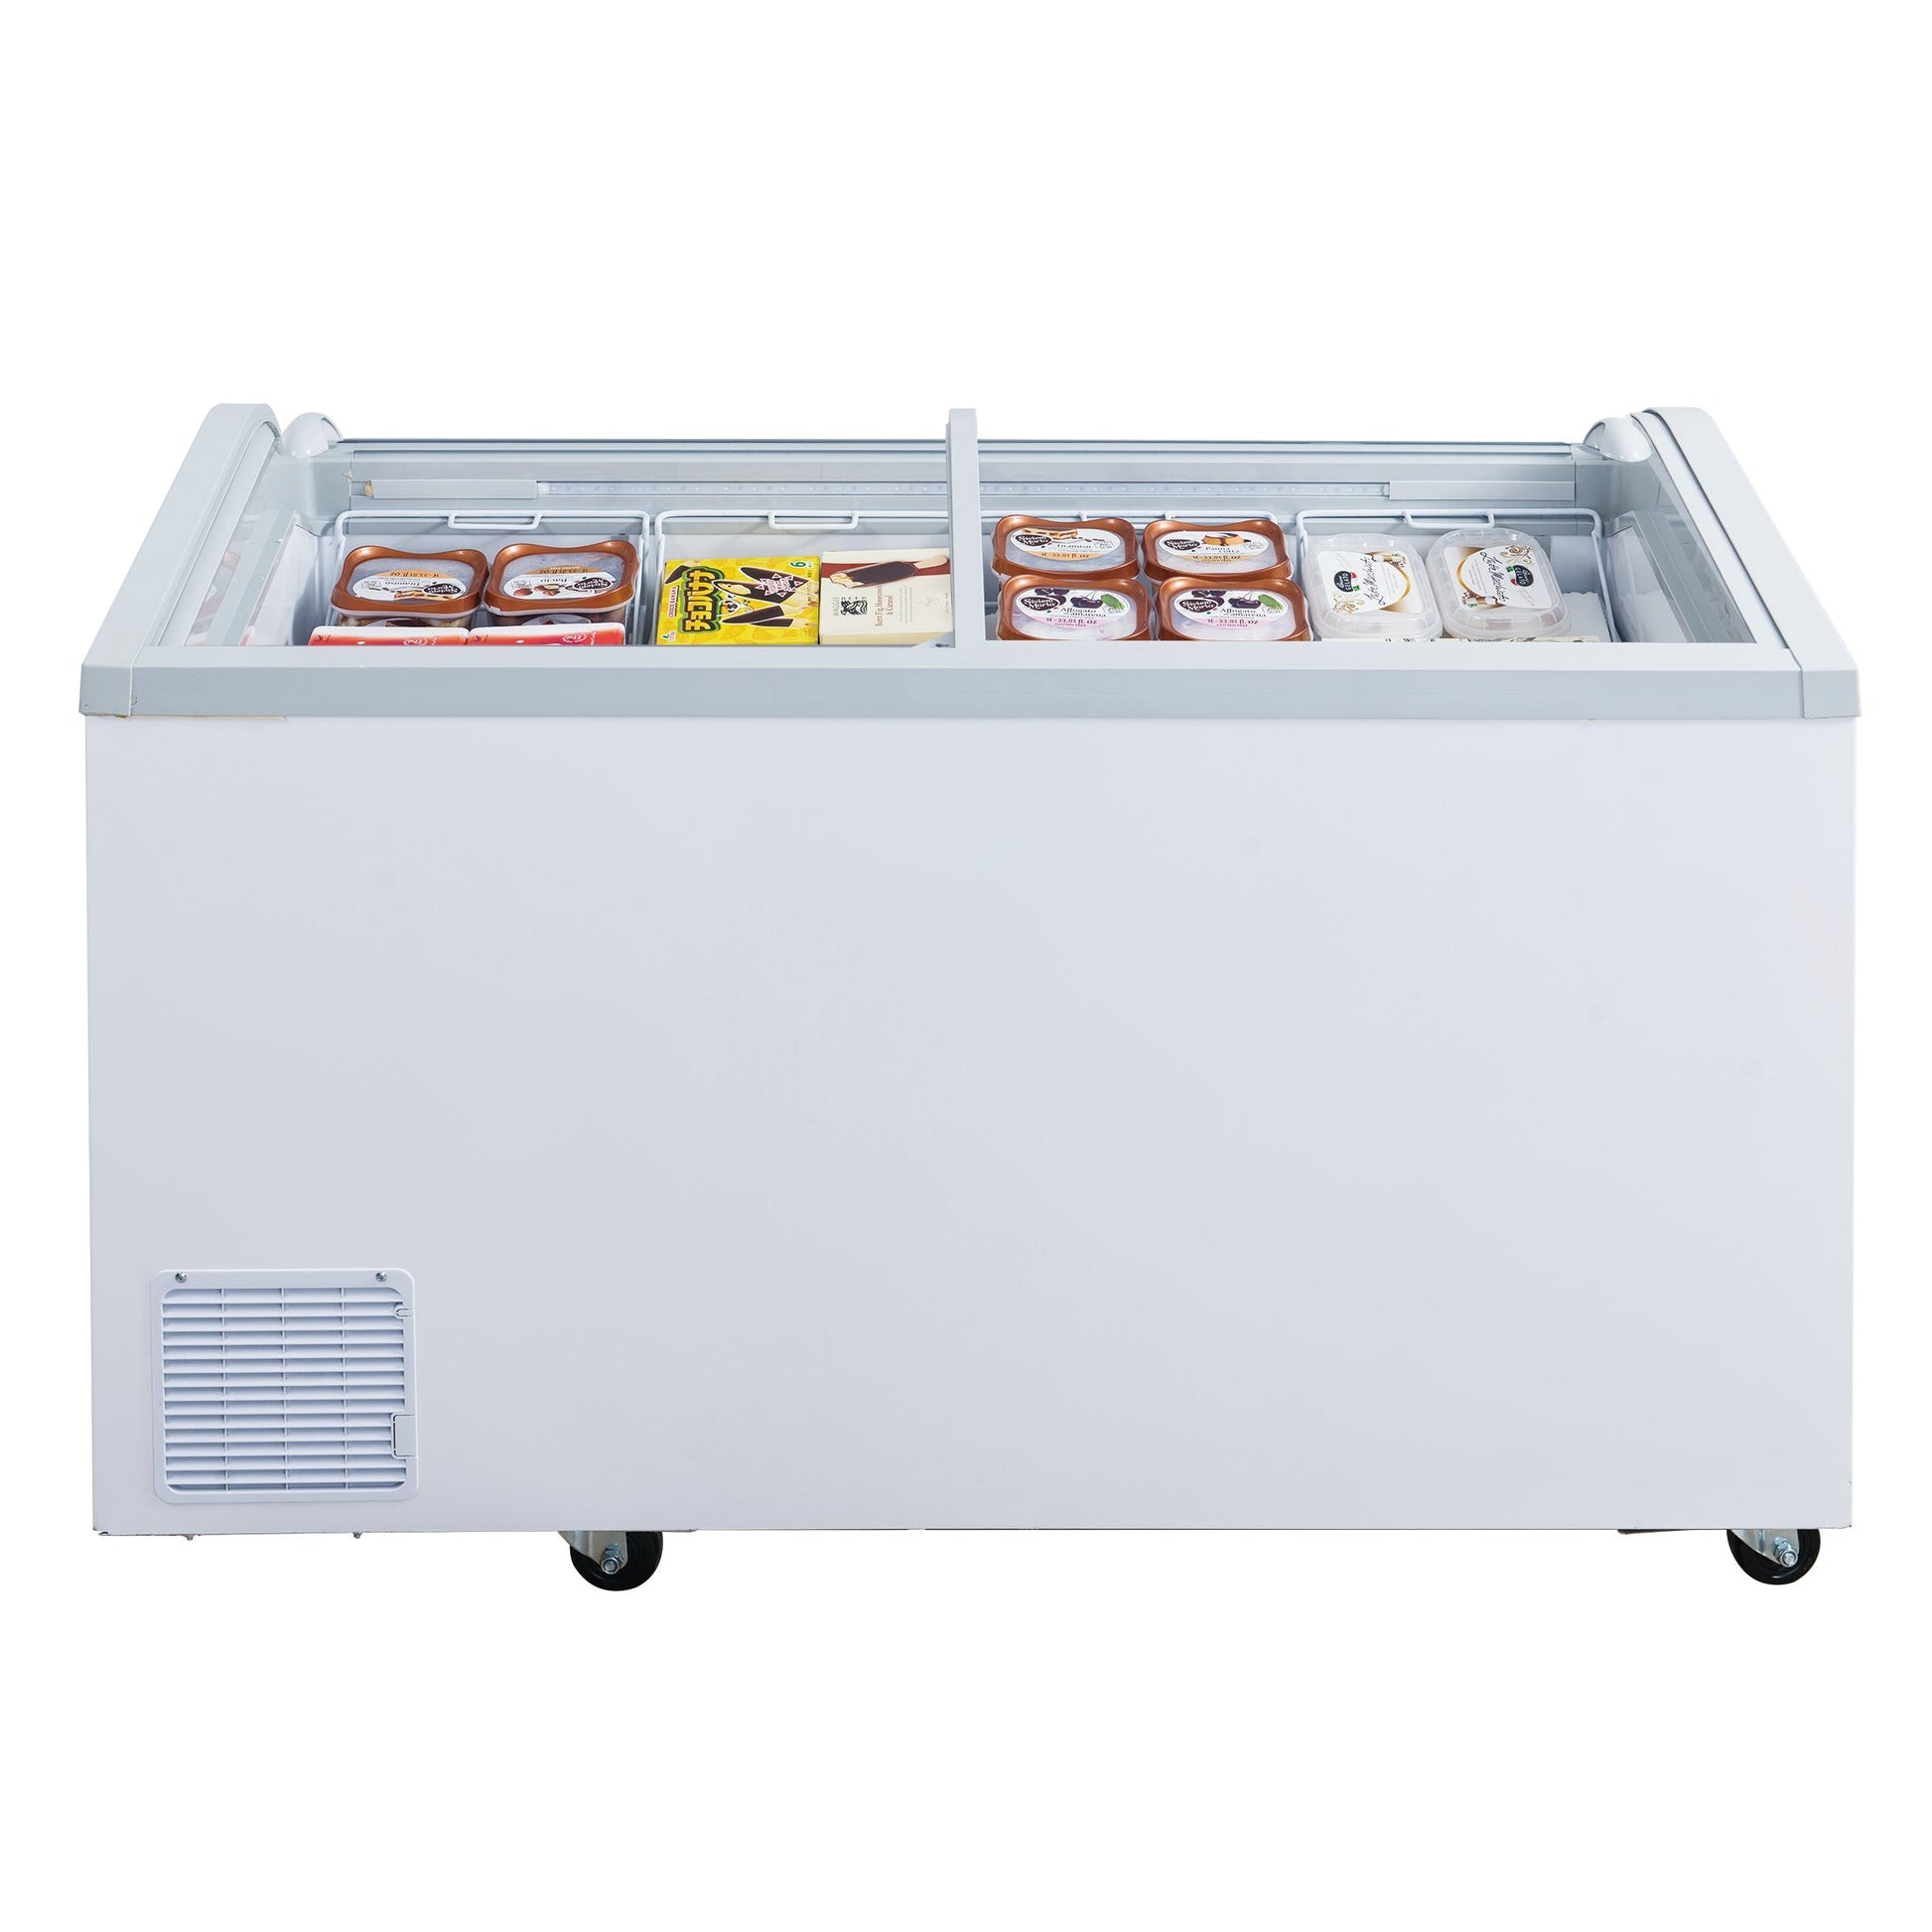 Dukers WD-700Y Curved Sliding Lid Chest Freezer